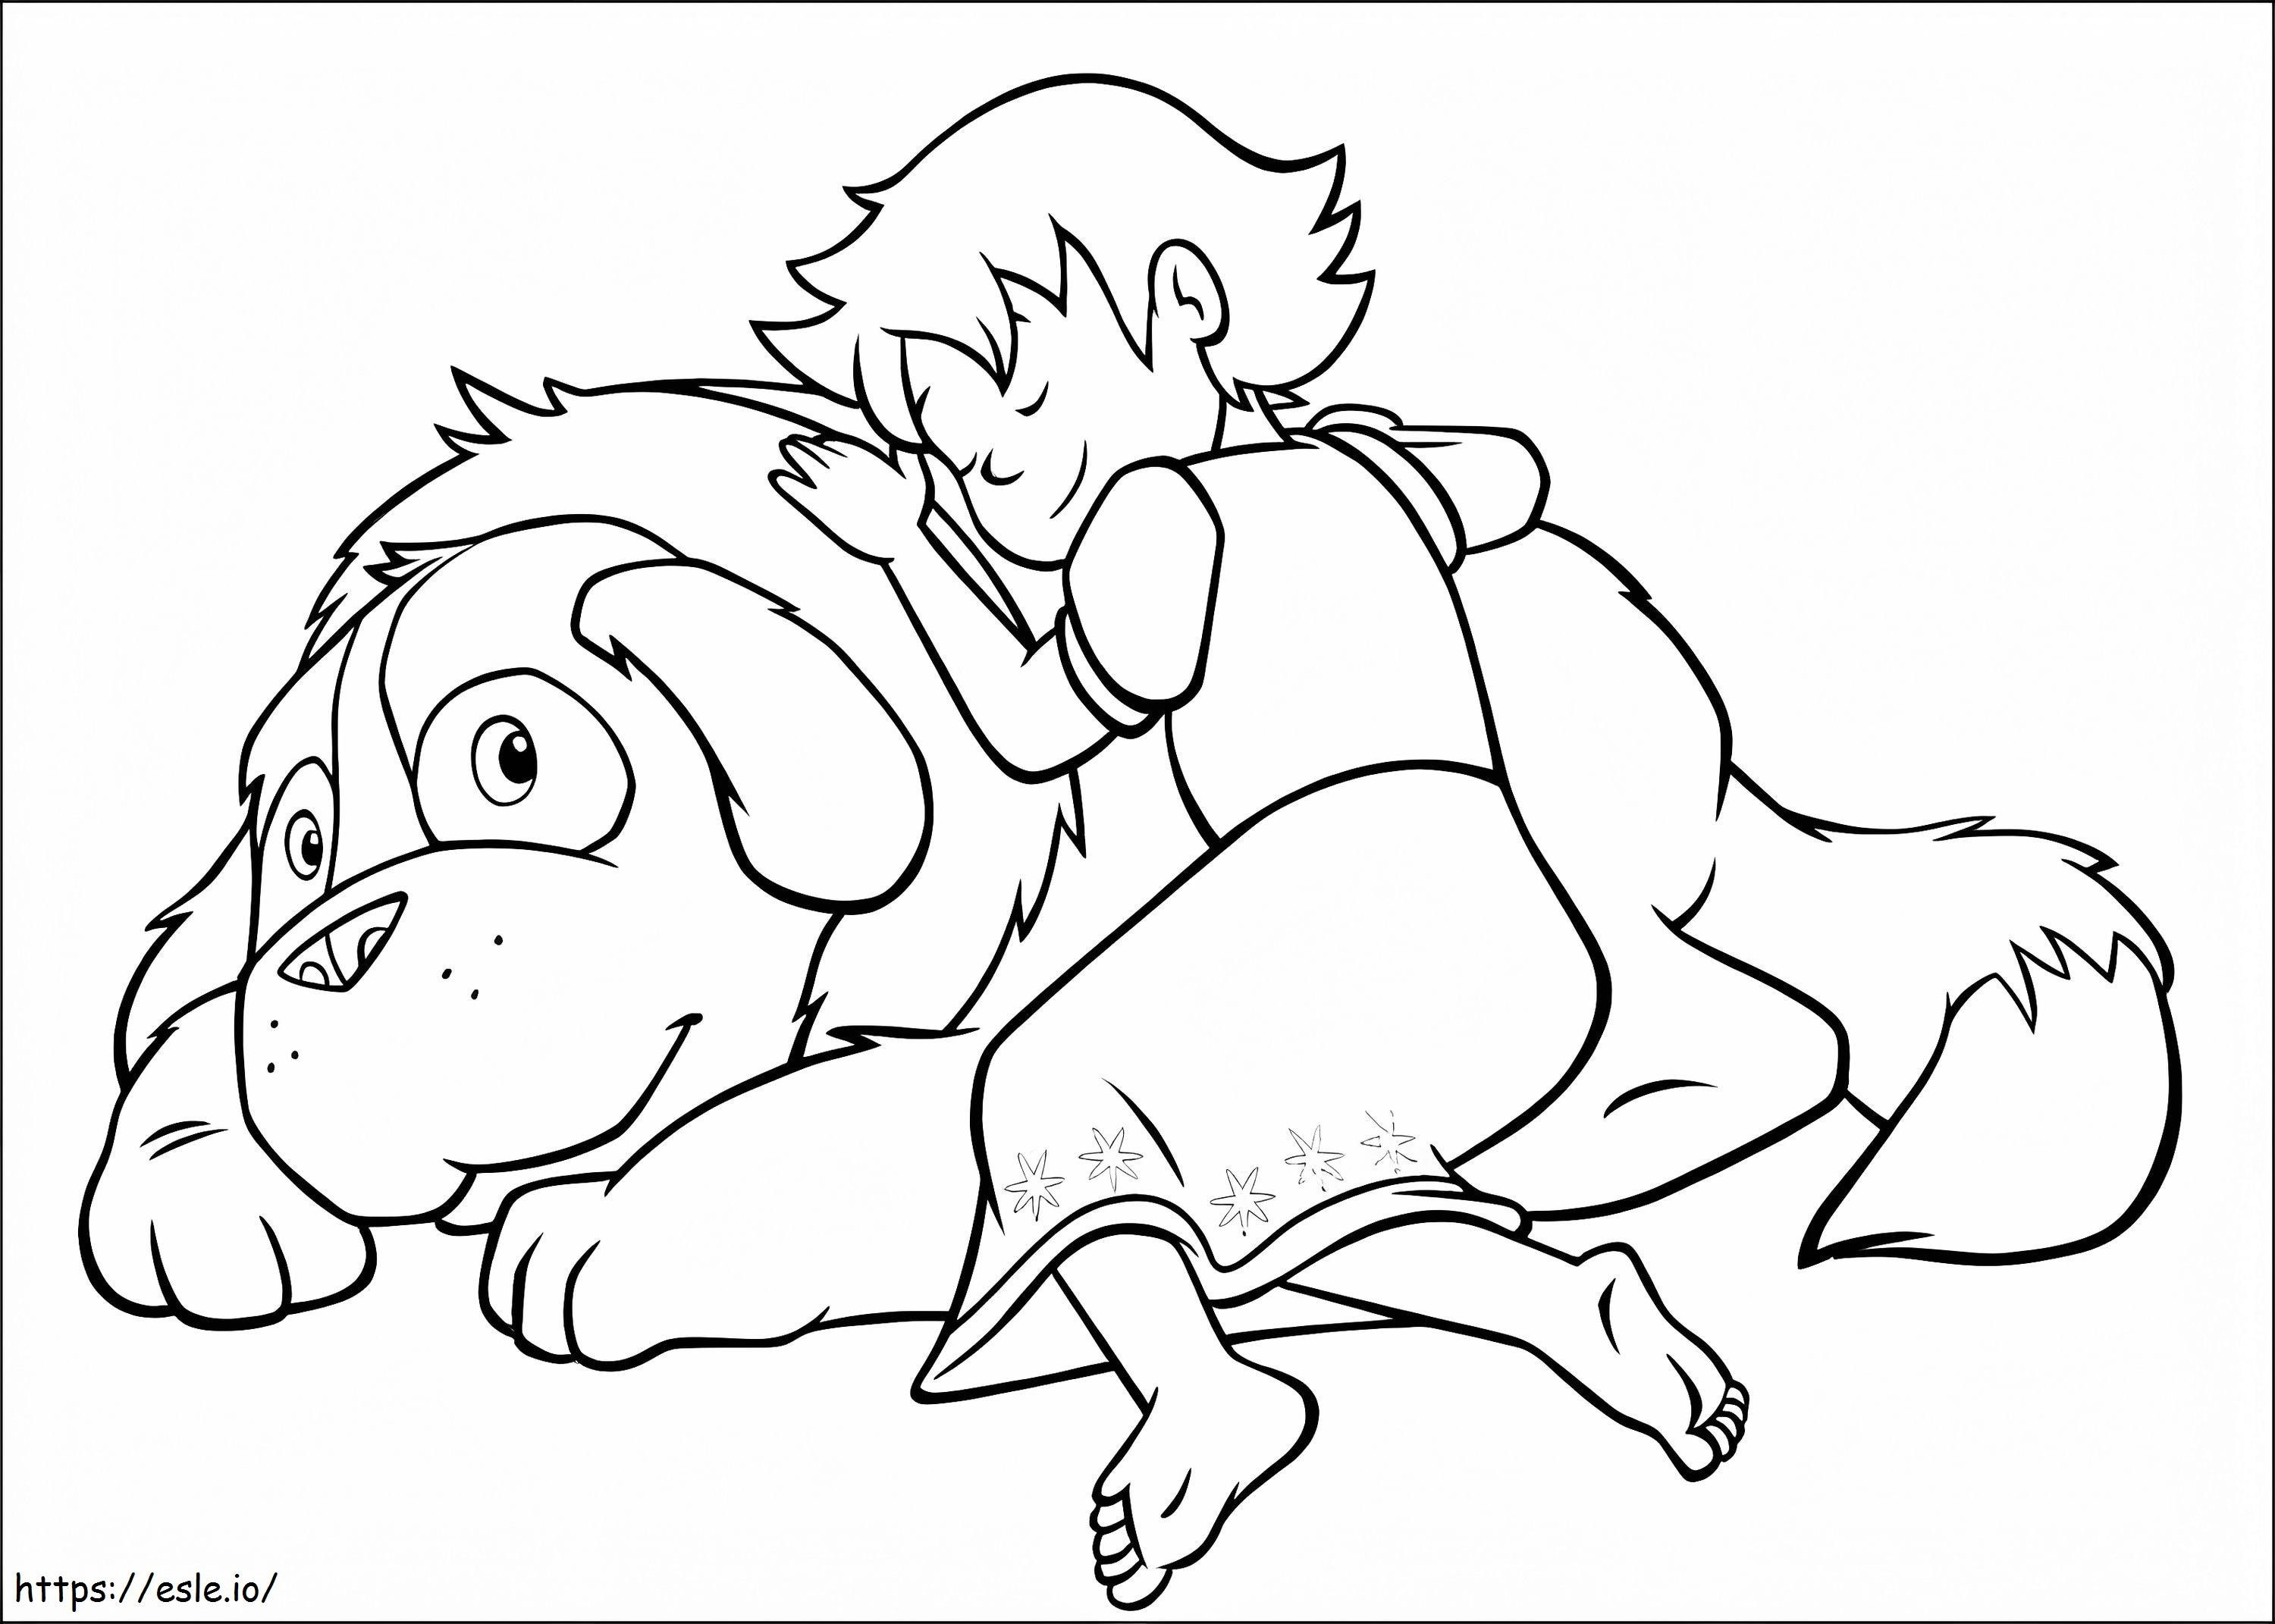 Heidi And Josef coloring page